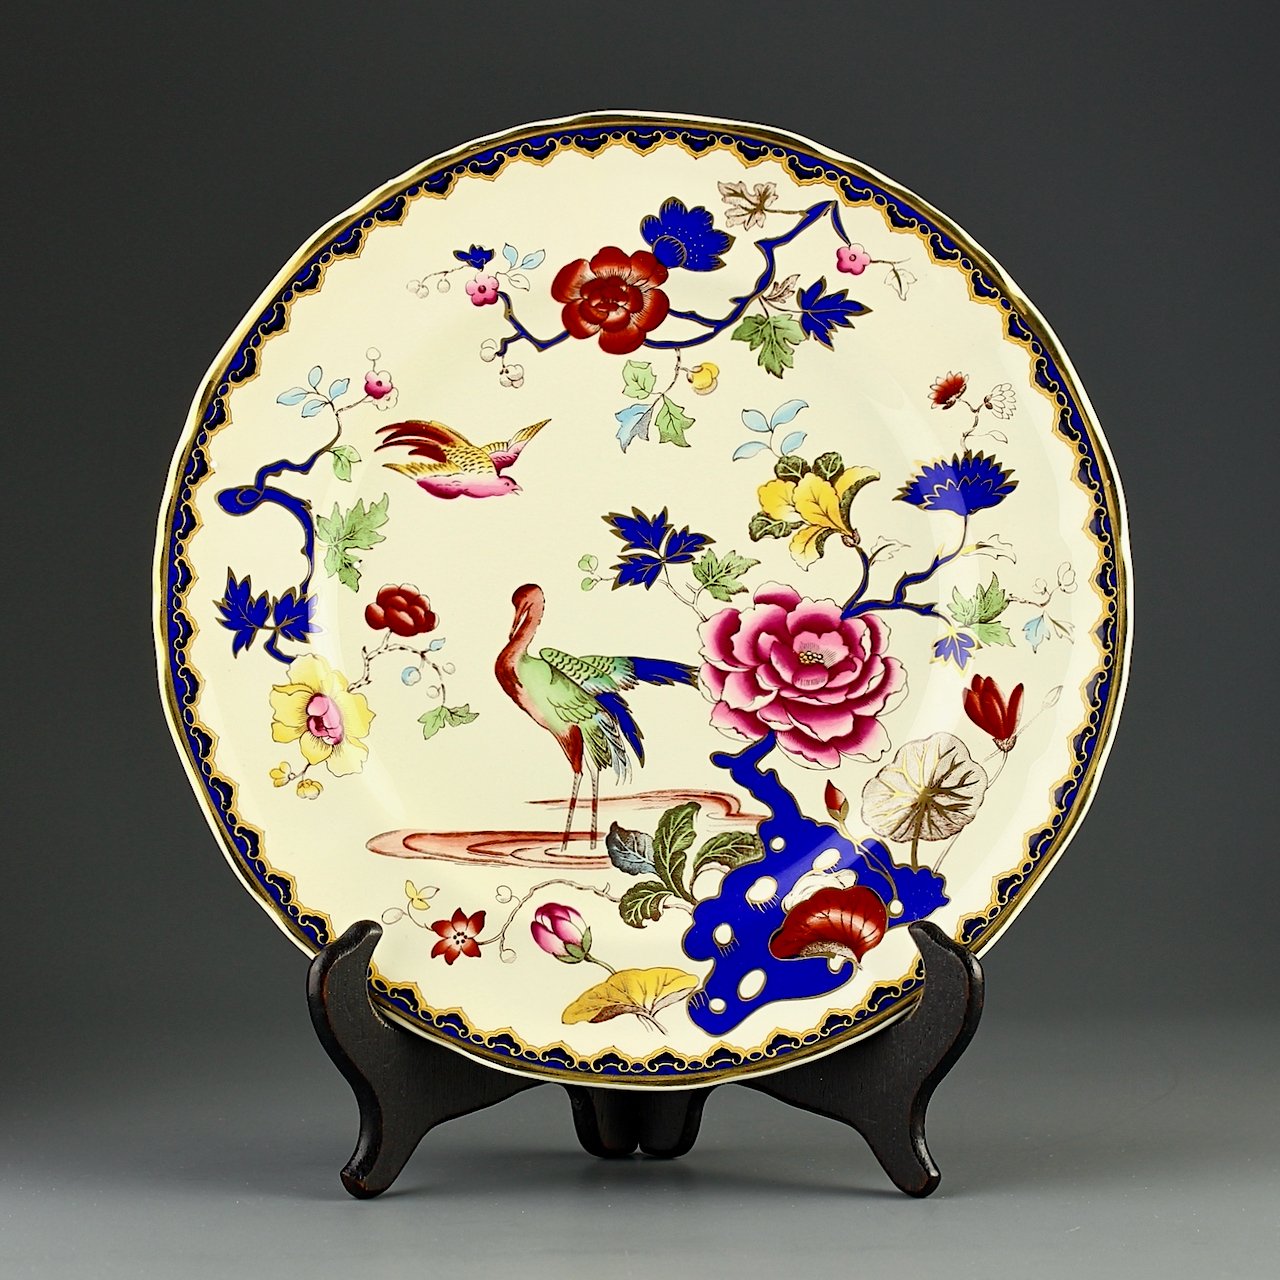 Collection plate